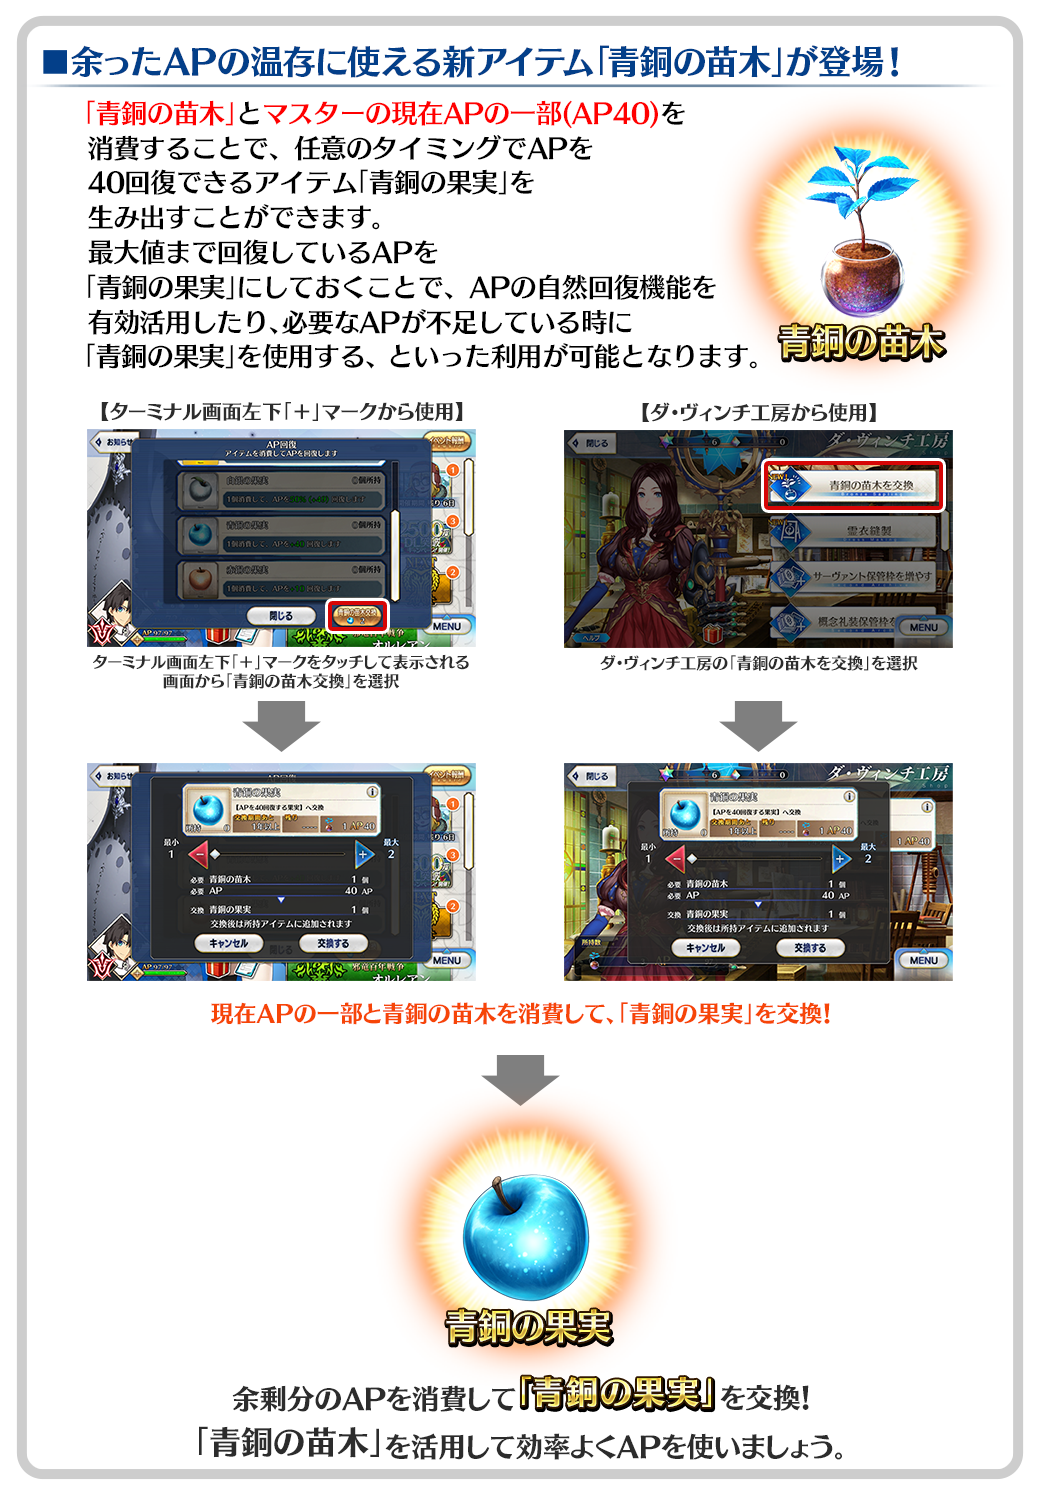 Fate Grand Orderお助けtips集 11 2 18 00掲載 Fate Grand Order 公式サイト